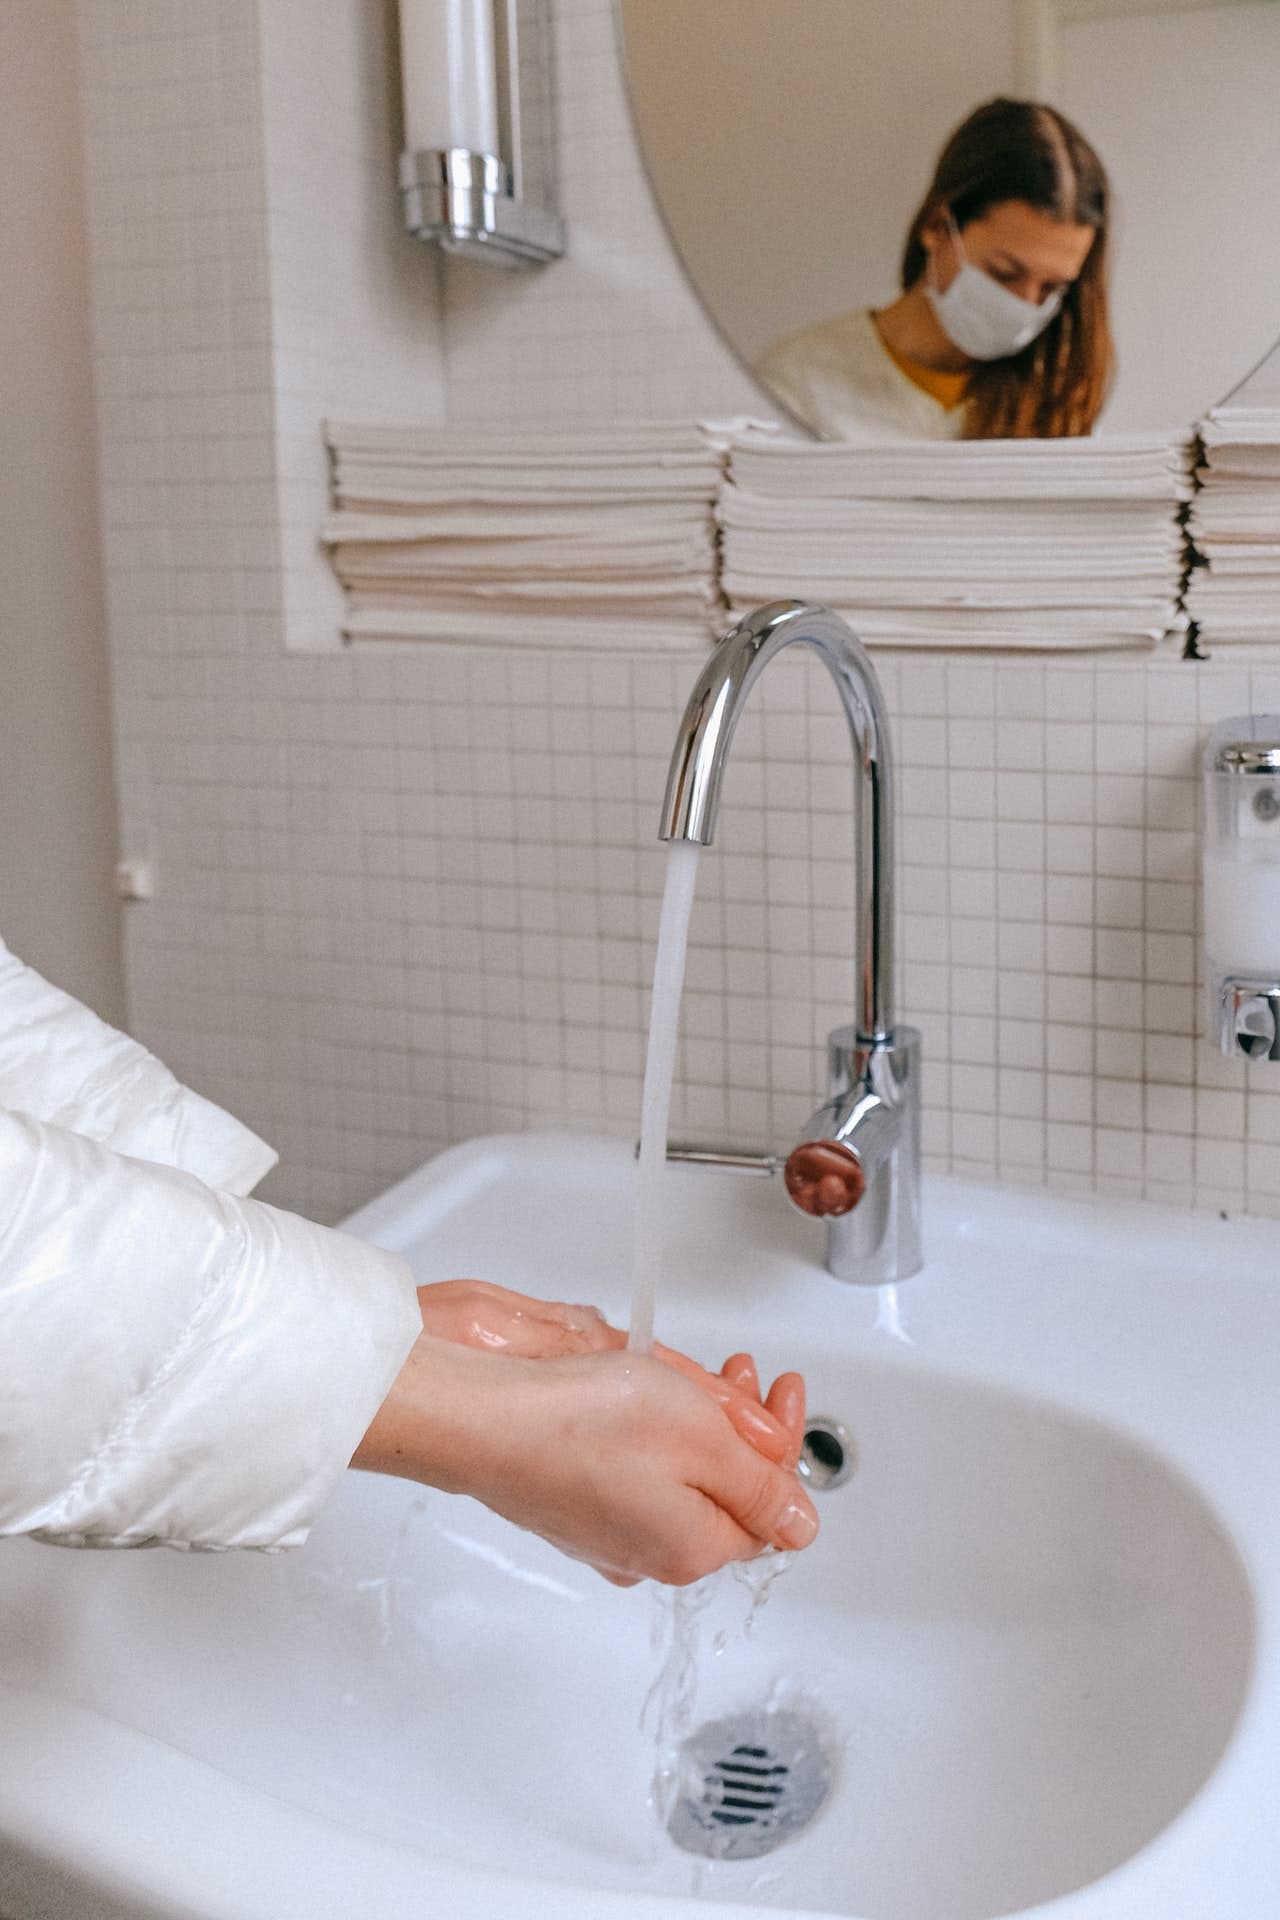 A woman washing her hands; her masked face is shown in a mirror above the sink. Photo by Anna Shvets from Pexels